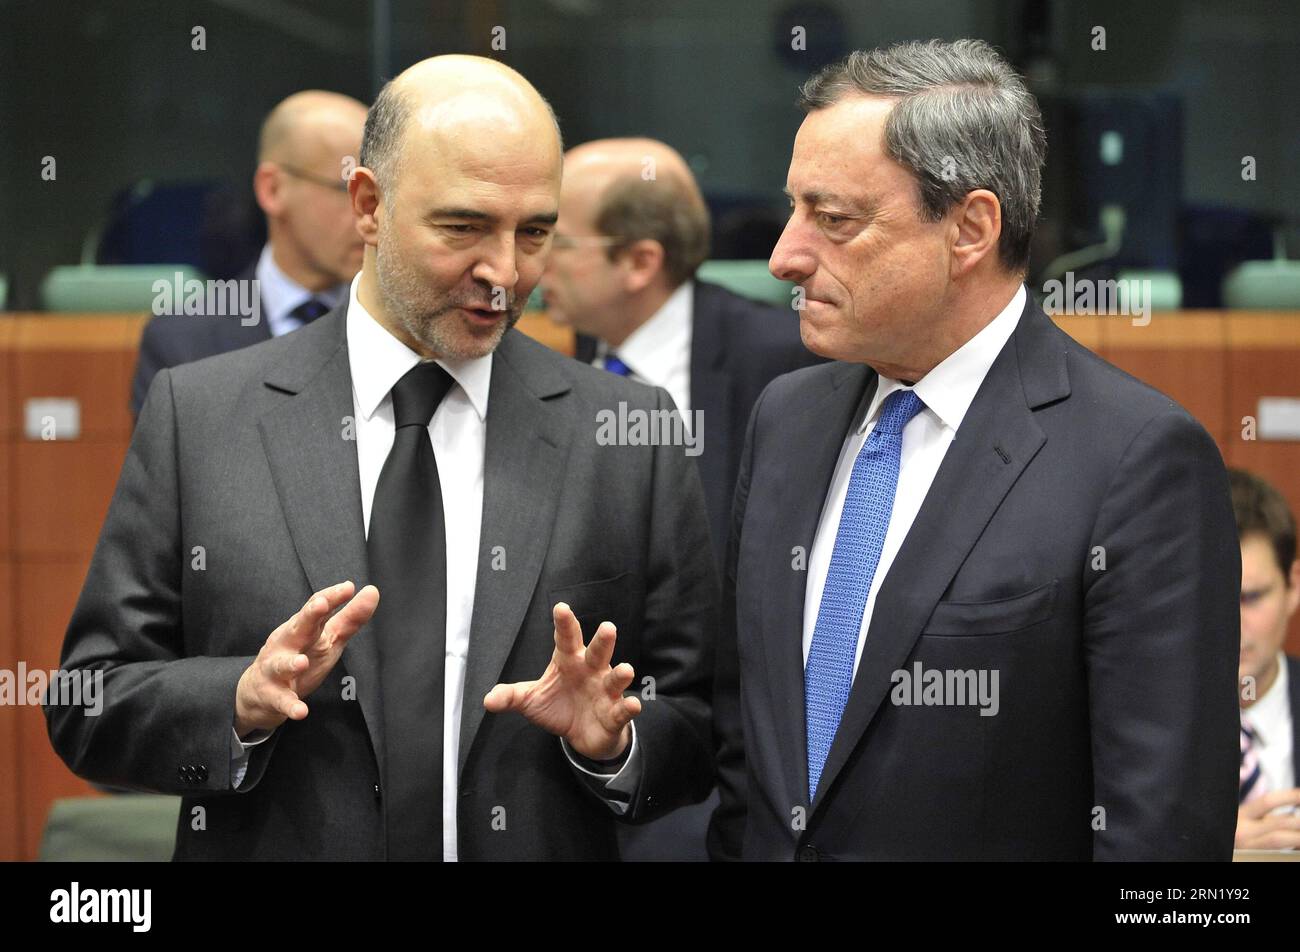 (150126) -- BRUSSELS, Jan. 26, 2015 -- European Commissioner for Economic and Financial Affairs, Taxation and Customs Pierre Moscovici (L) speaks with European Central Bank (ECB) President Mario Draghi prior to an Eurogroup finance ministers meeting at EU headquarters in Brussels, Belgium, Jan. 26, 2015. ) BELGIUM-BRUSSELS-EUROGROUP-MEETING YexPingfan PUBLICATIONxNOTxINxCHN   Brussels Jan 26 2015 European Commissioner for Economic and Financial Affairs Taxation and Customs Pierre Moscovici l Speaks With European Central Bank ECB President Mario Draghi Prior to to Euro Group Finance Minister Me Stock Photo